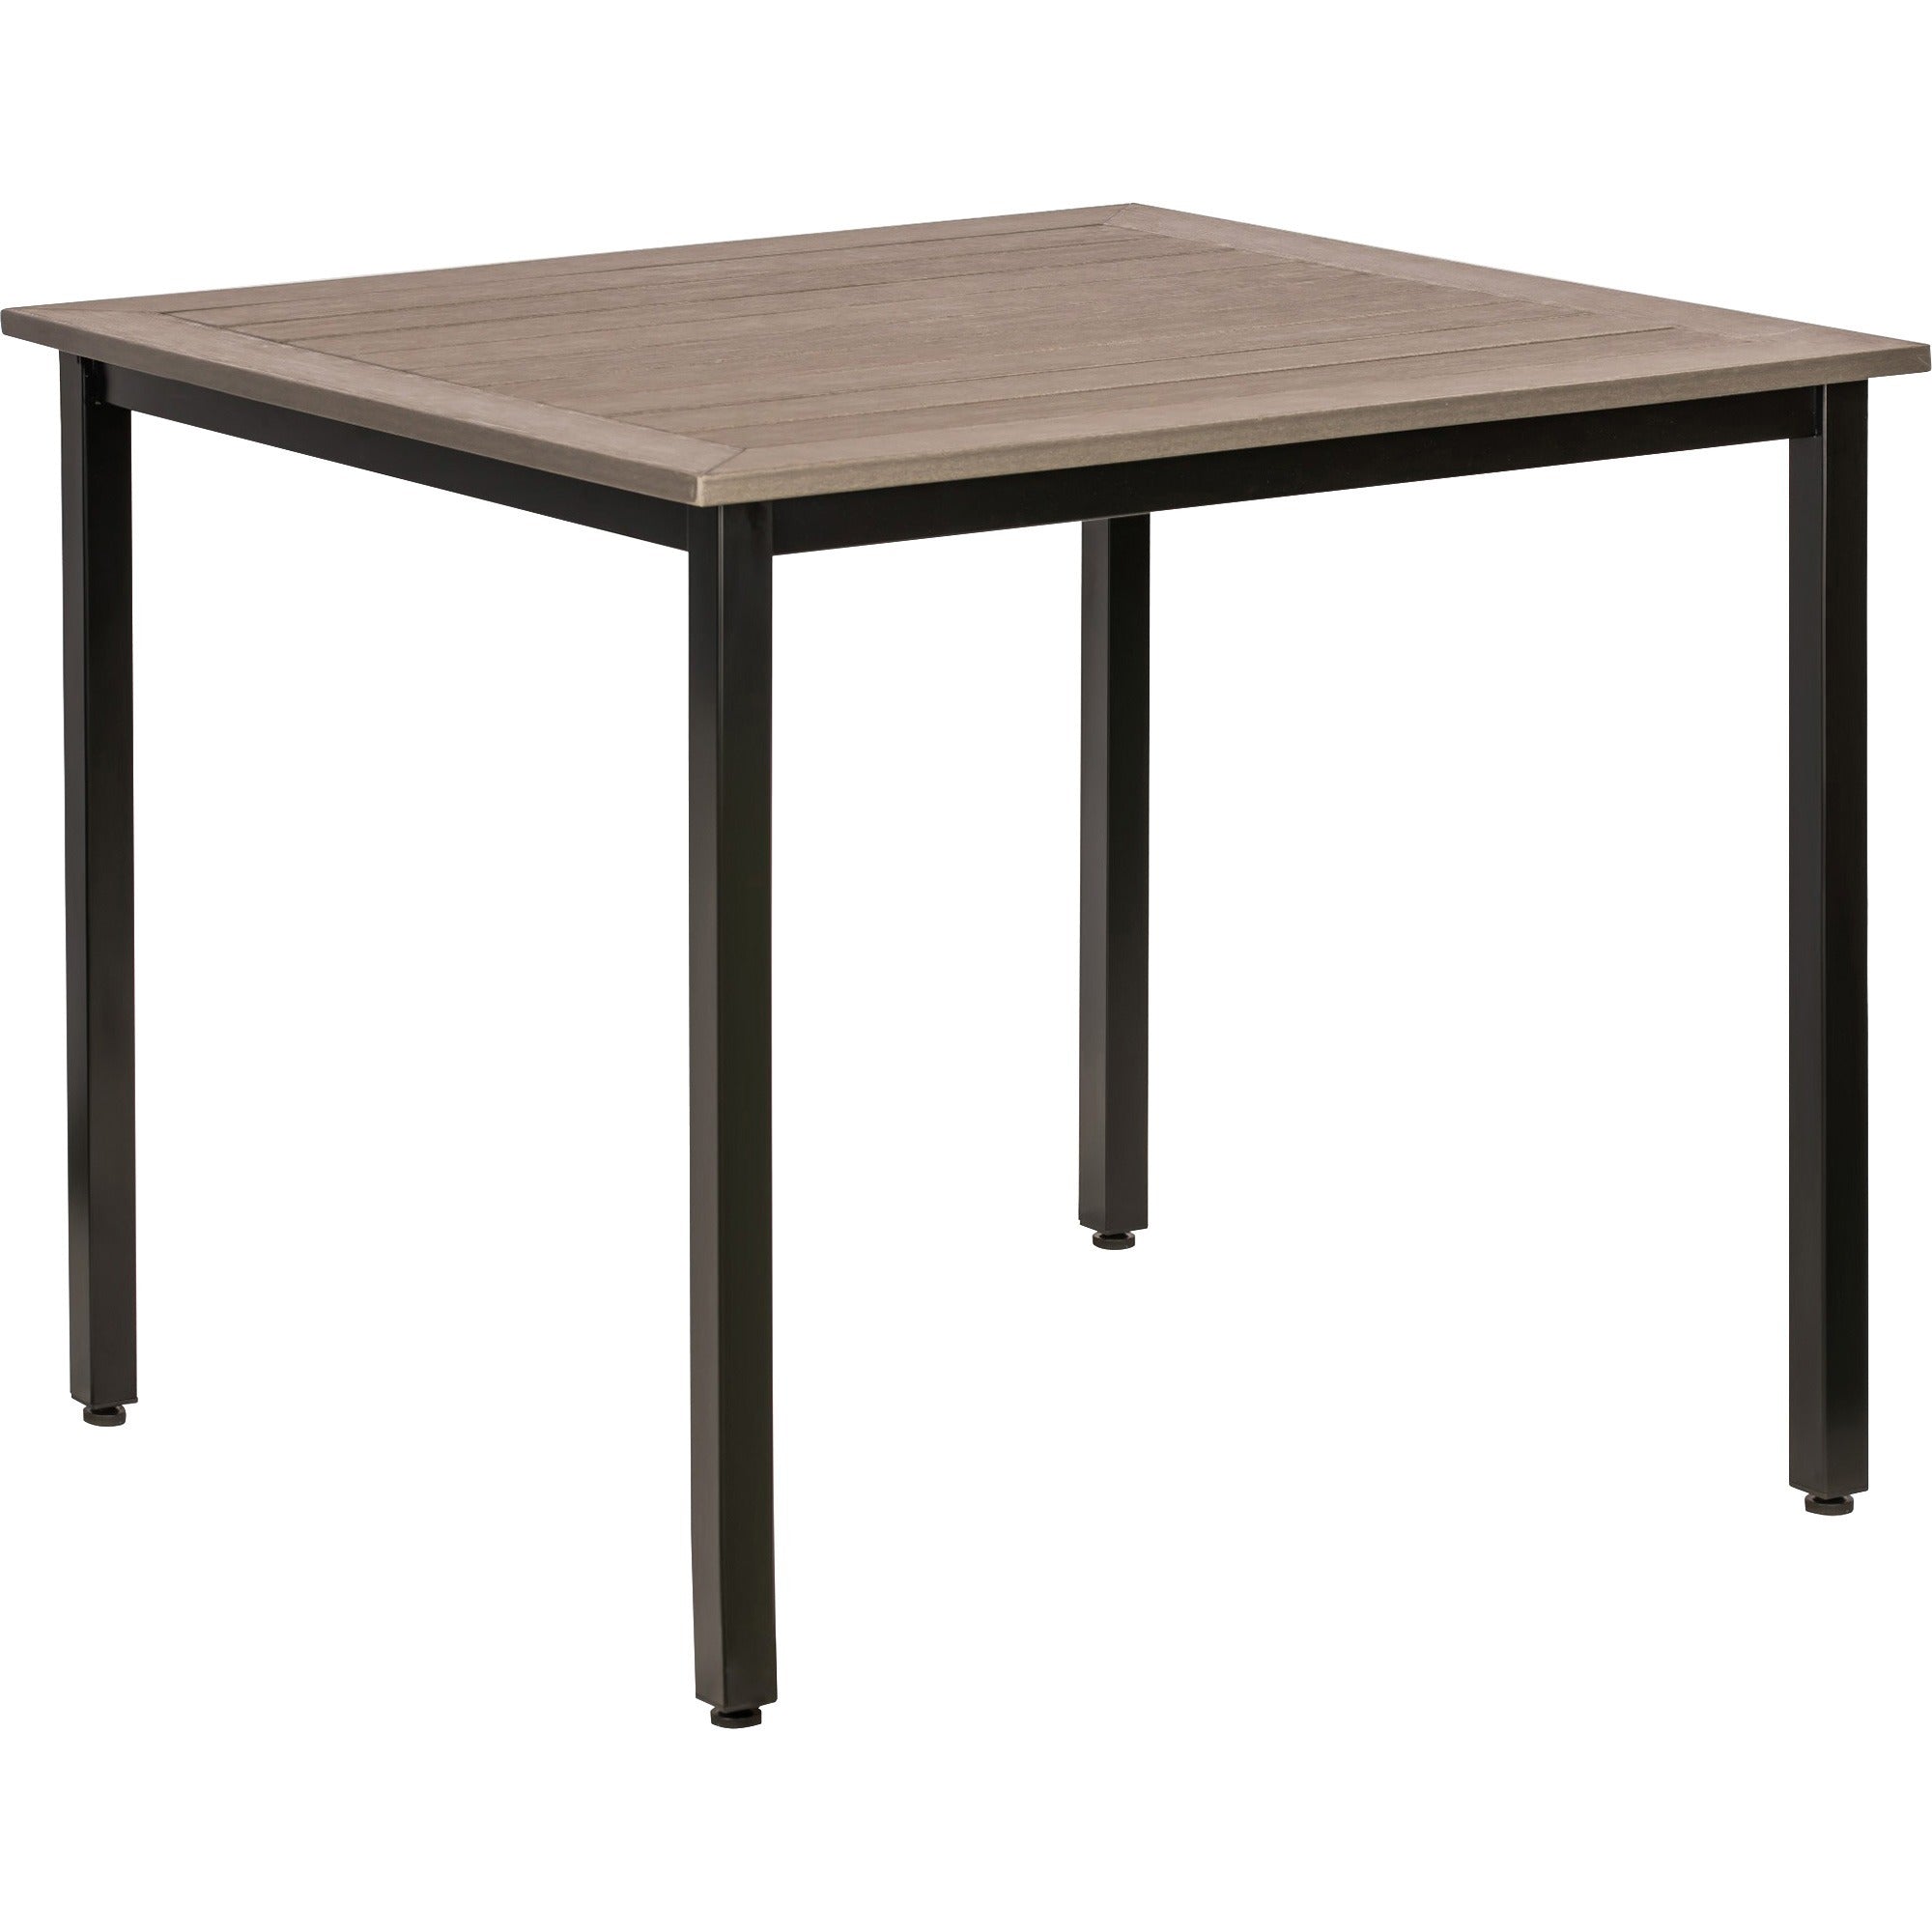 lorell-faux-wood-outdoor-table-for-table-topcharcoal-square-top-black-four-leg-base-4-legs-3660-table-top-length-x-3660-table-top-width-3075-height-assembly-required-1-each_llr42686 - 1